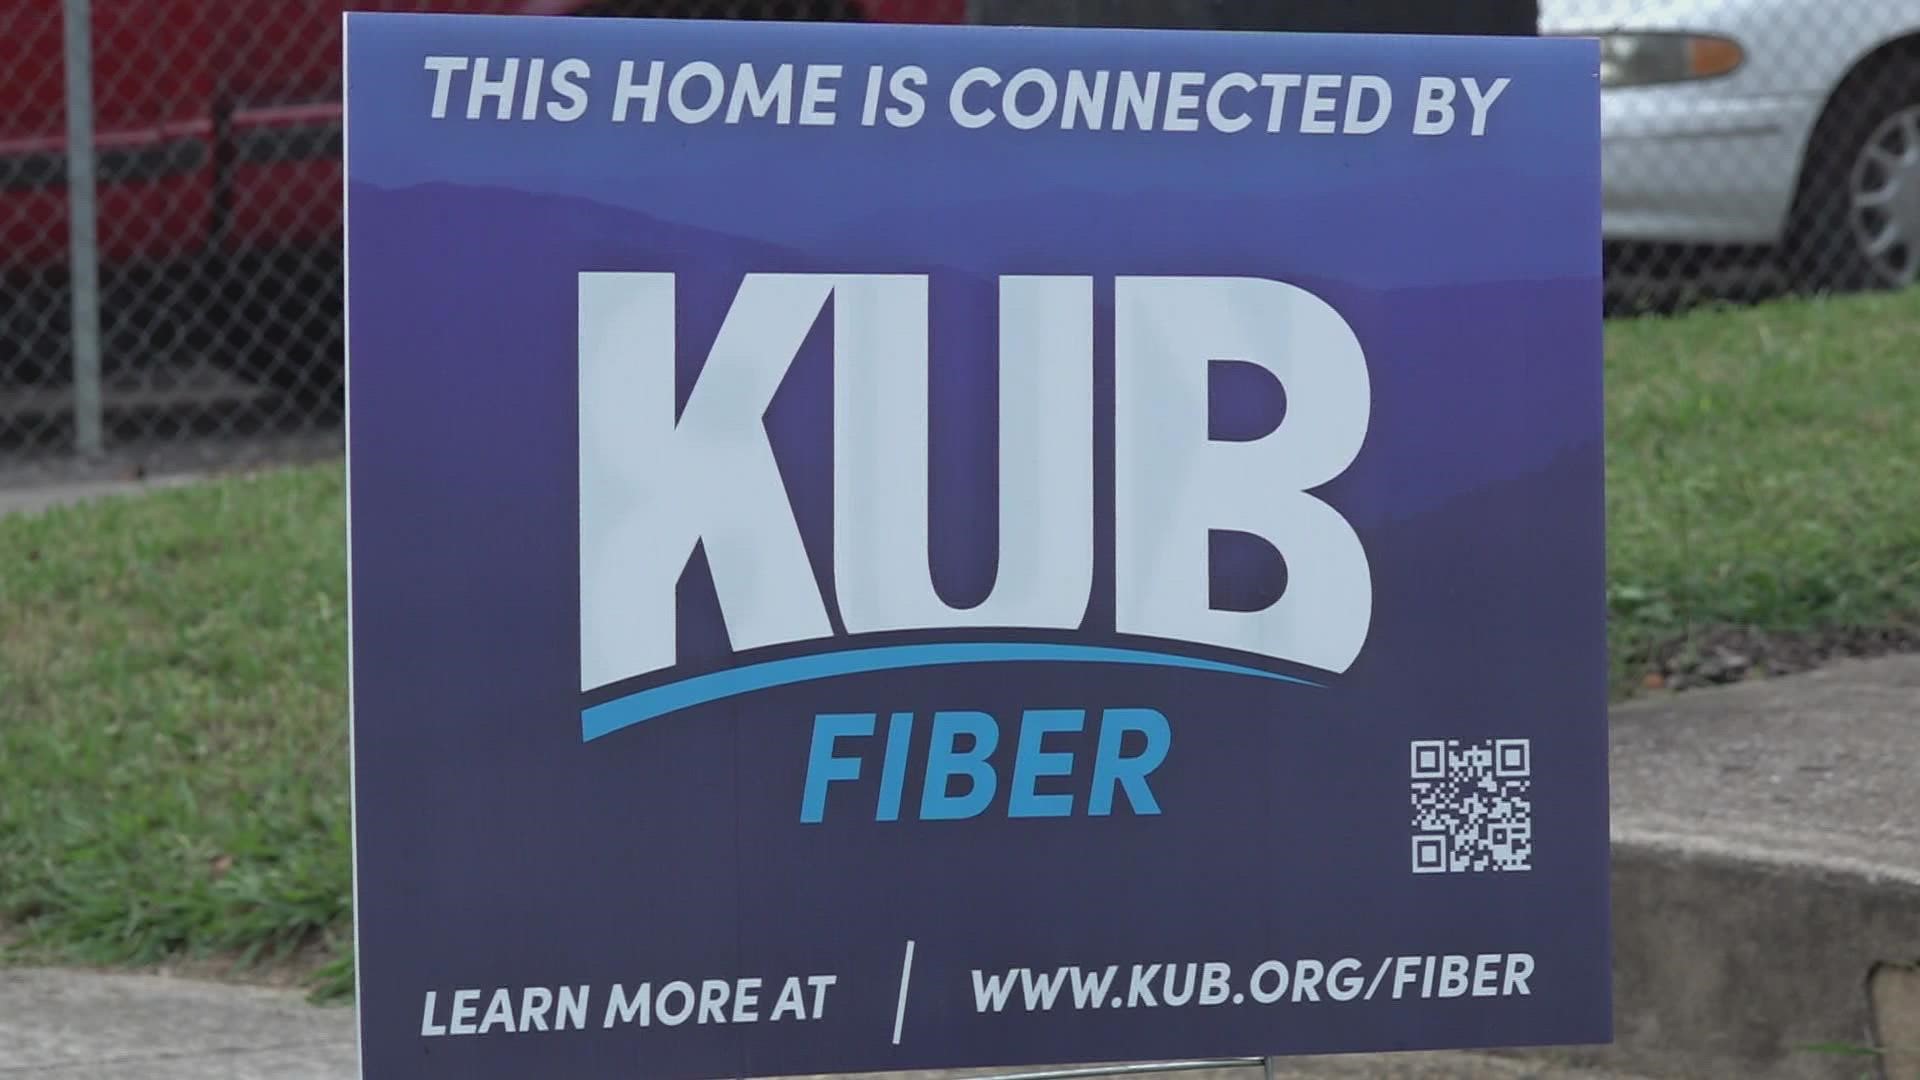 The program is a way for KUB to test out its fiber internet systems before they start building the system across Knox County.